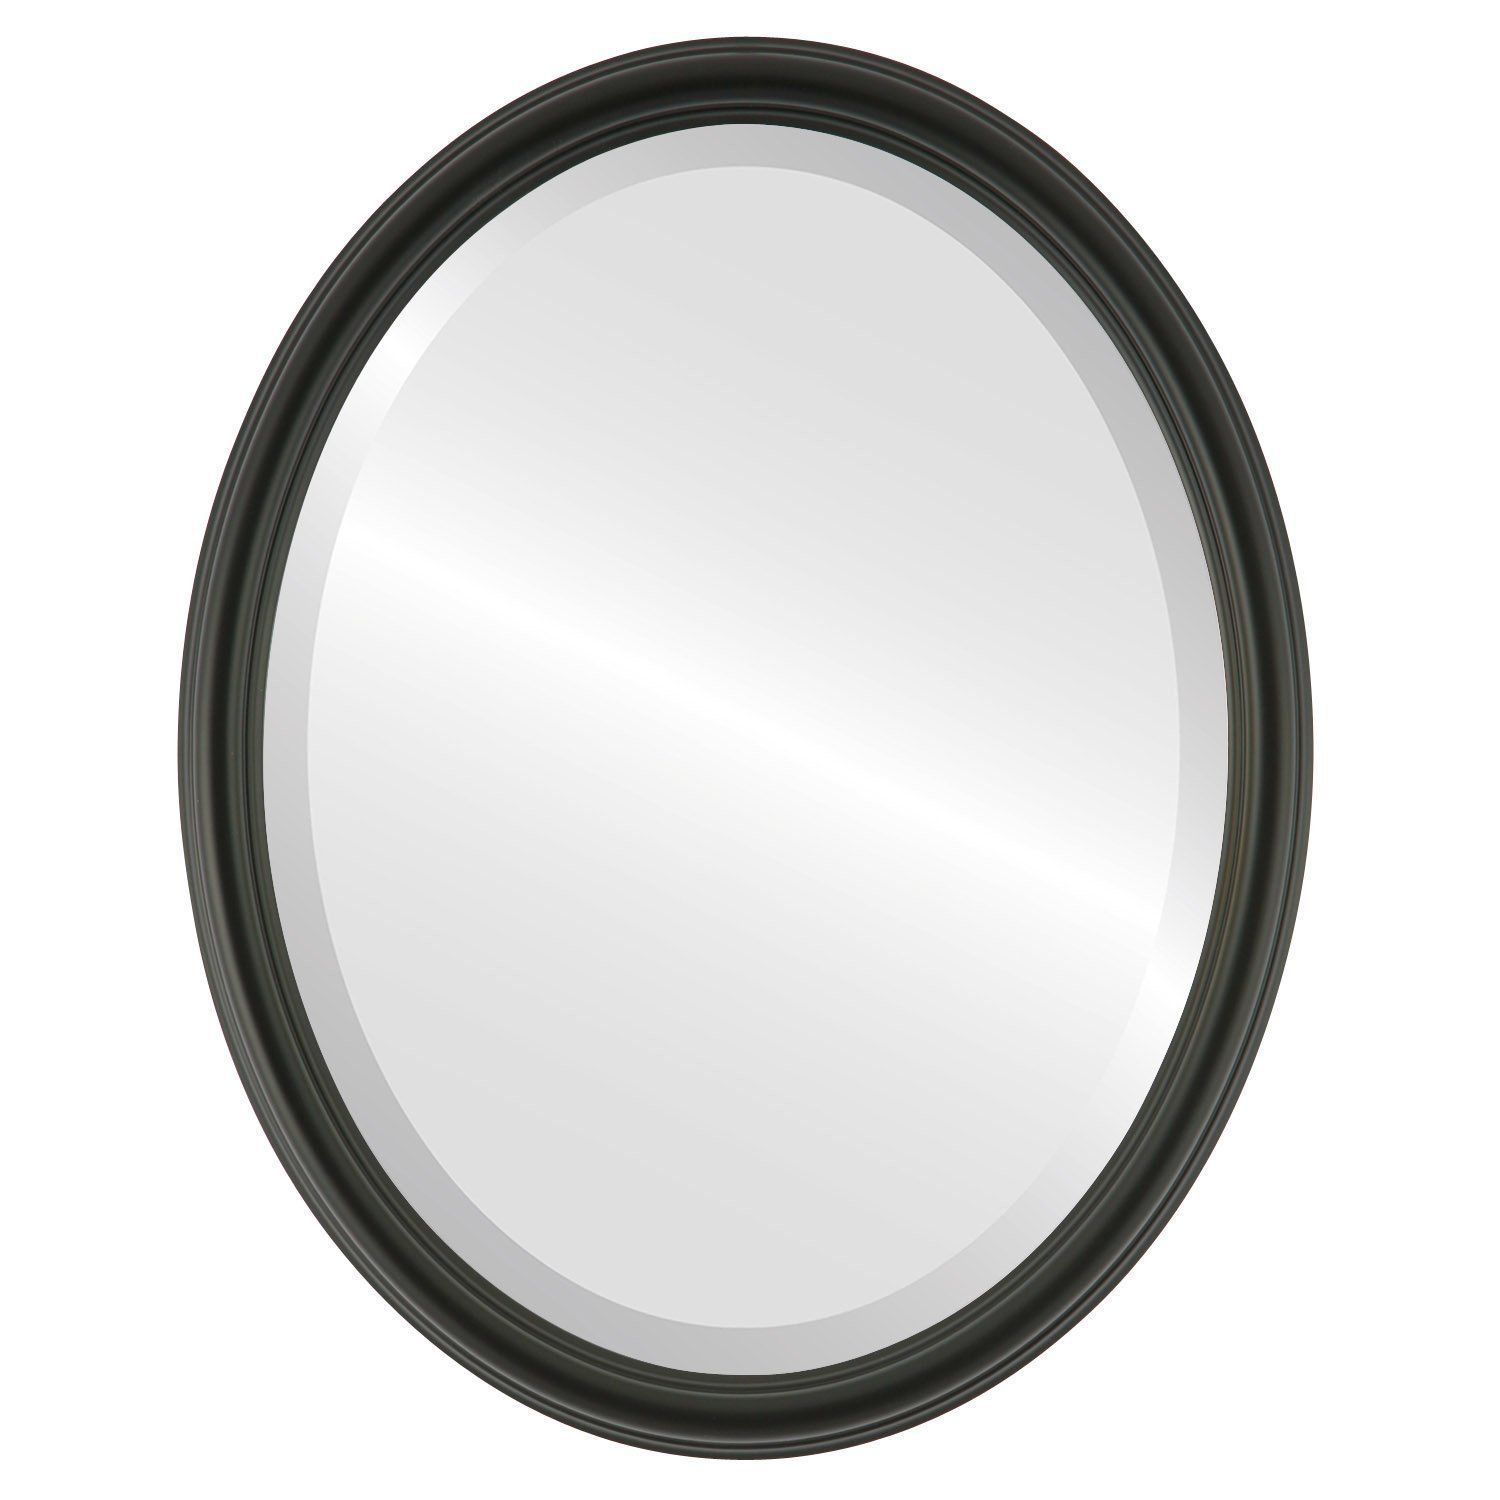 Saratoga Oval In Matte Black >>> Check Out The Imagevisiting The With Regard To Matte Black Metal Oval Wall Mirrors (View 3 of 15)